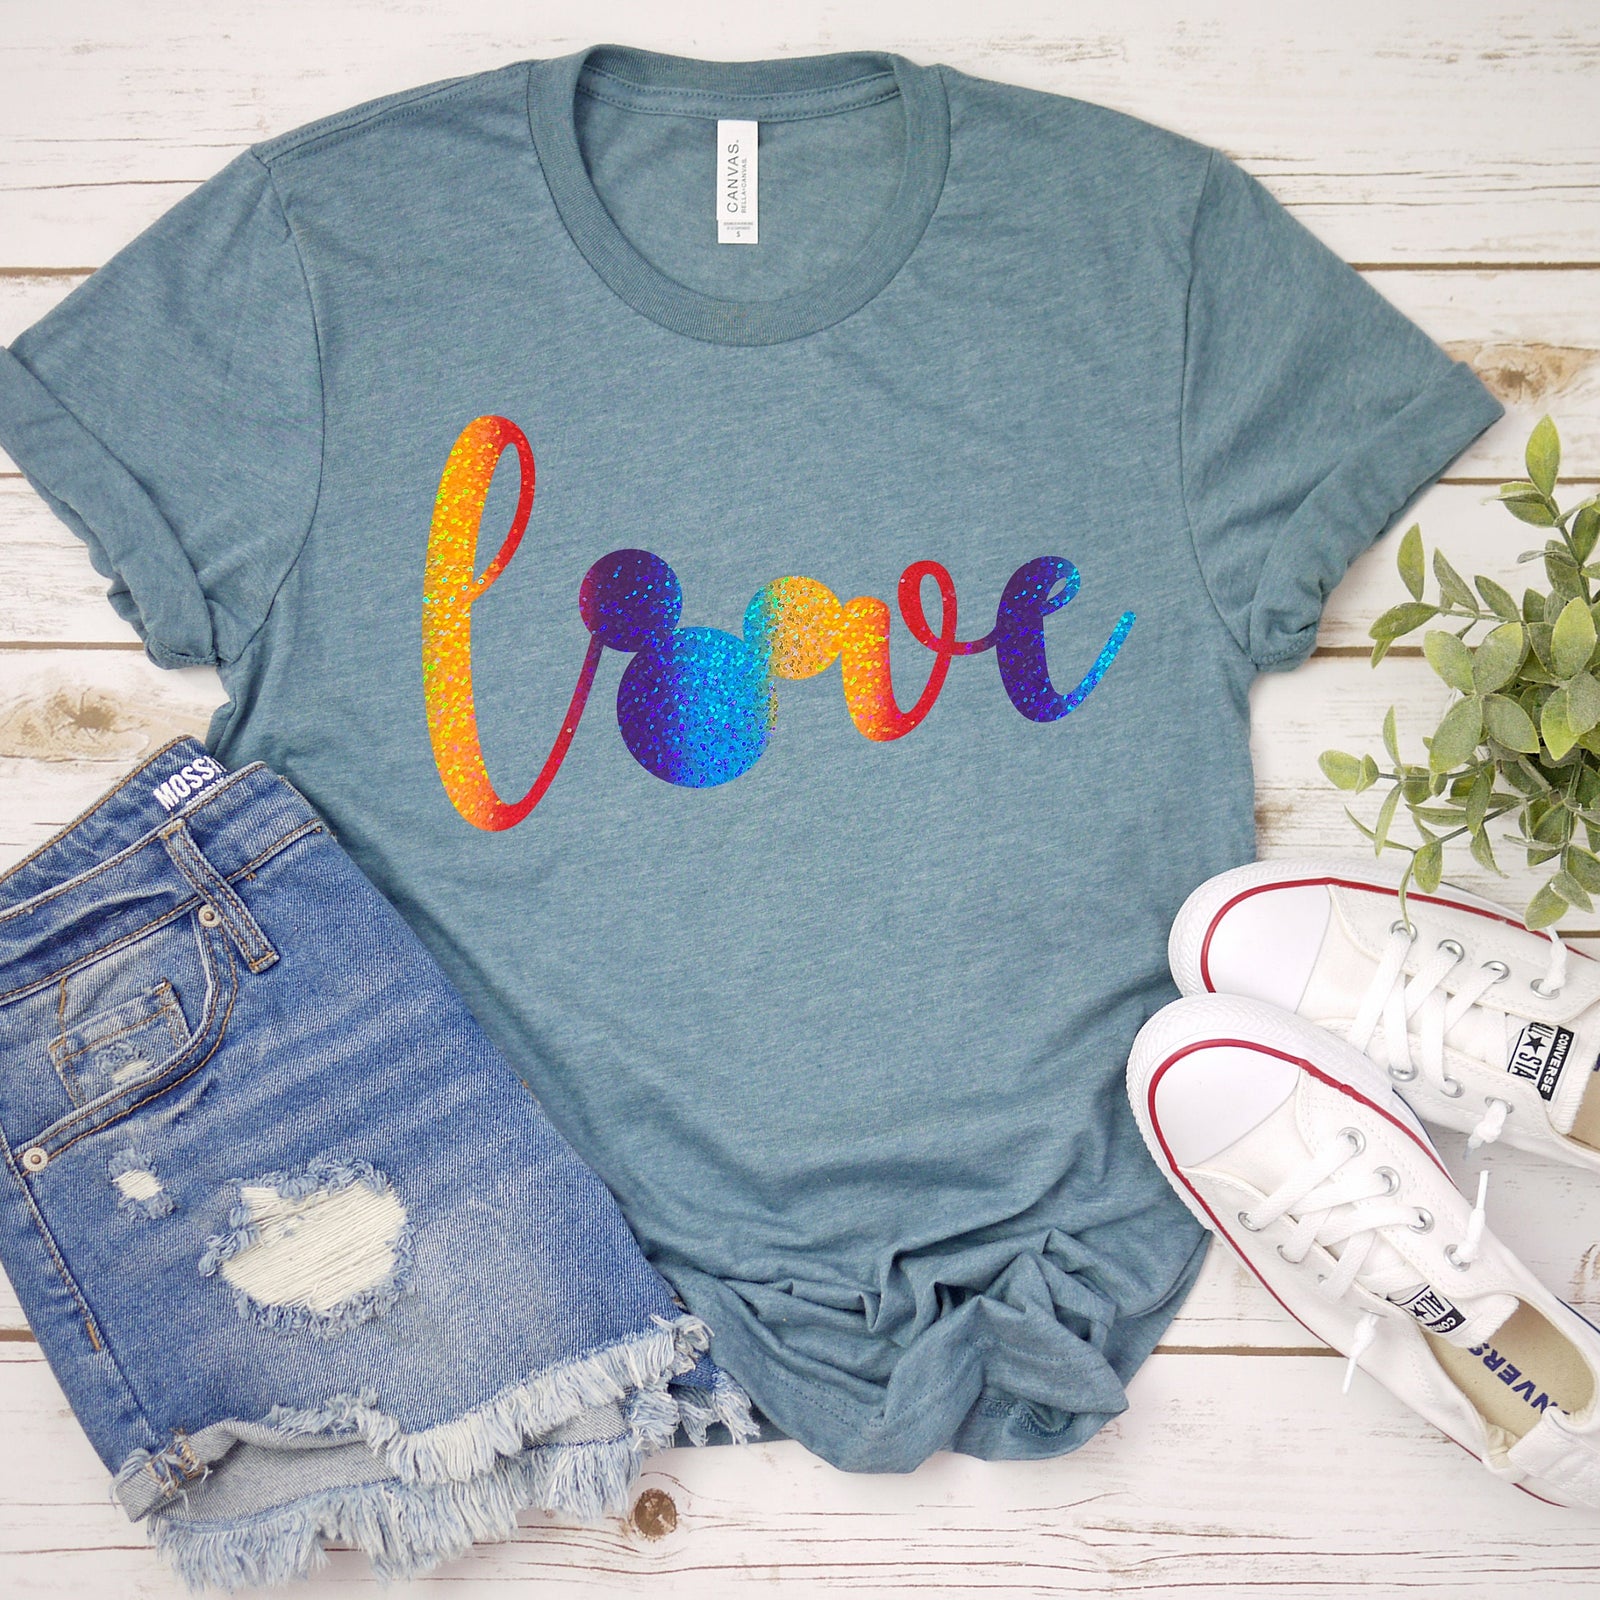 LOVE Mickey Mouse T Shirt - Disney Valentine's Day - Adult Unisex Mickey Mouse Favorite Tee - Rainbow Glitter